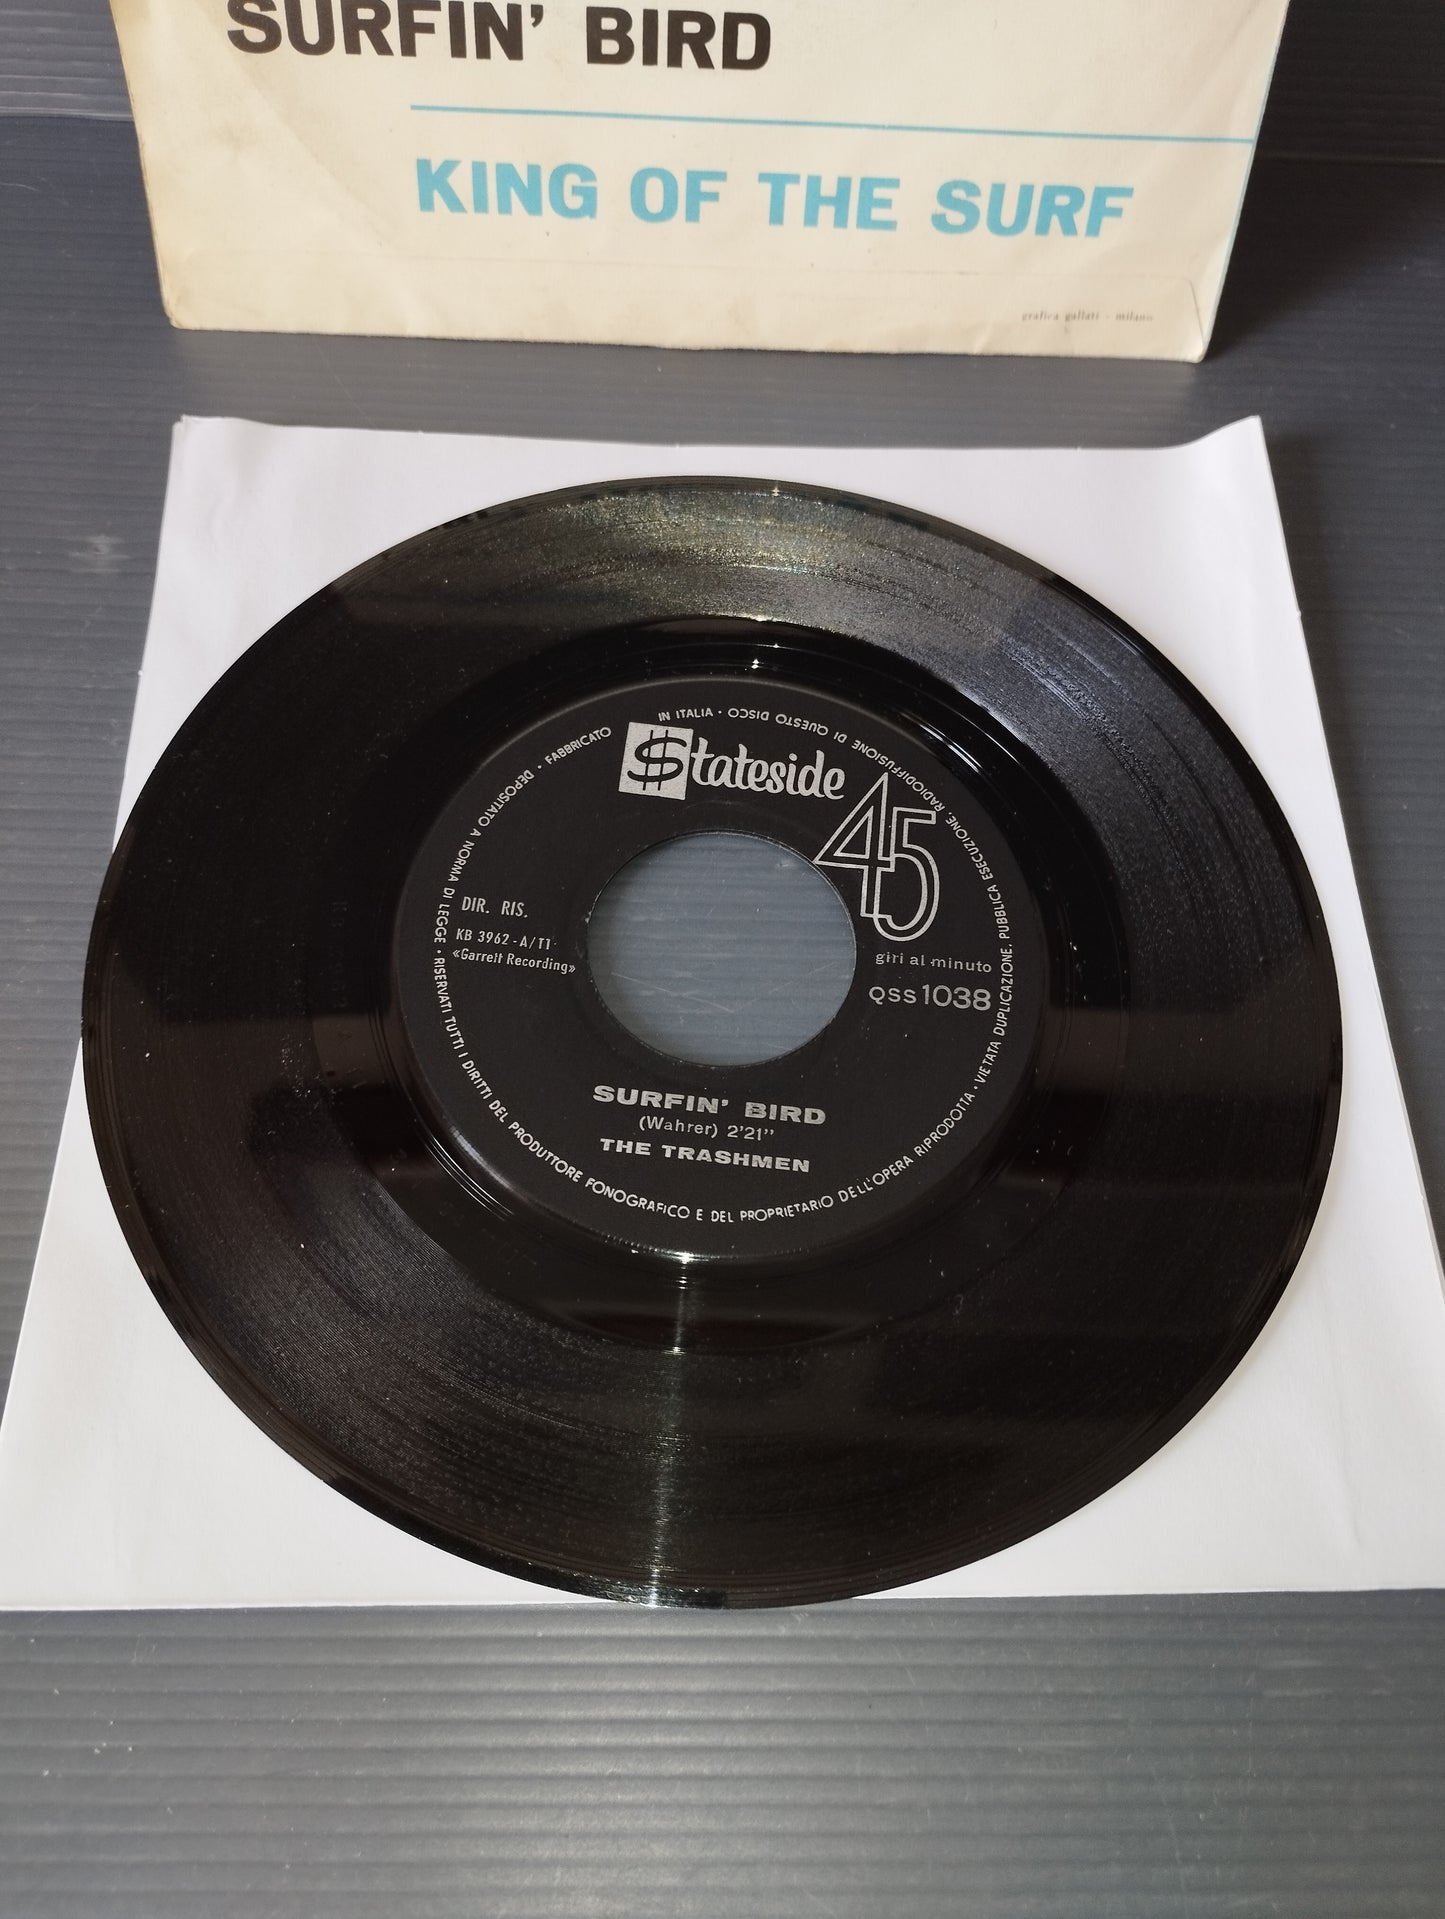 Surfin'Bird /King Of.." The Trashmen 45 rpm

 Published in 1964 by Stateside code QSS 1038